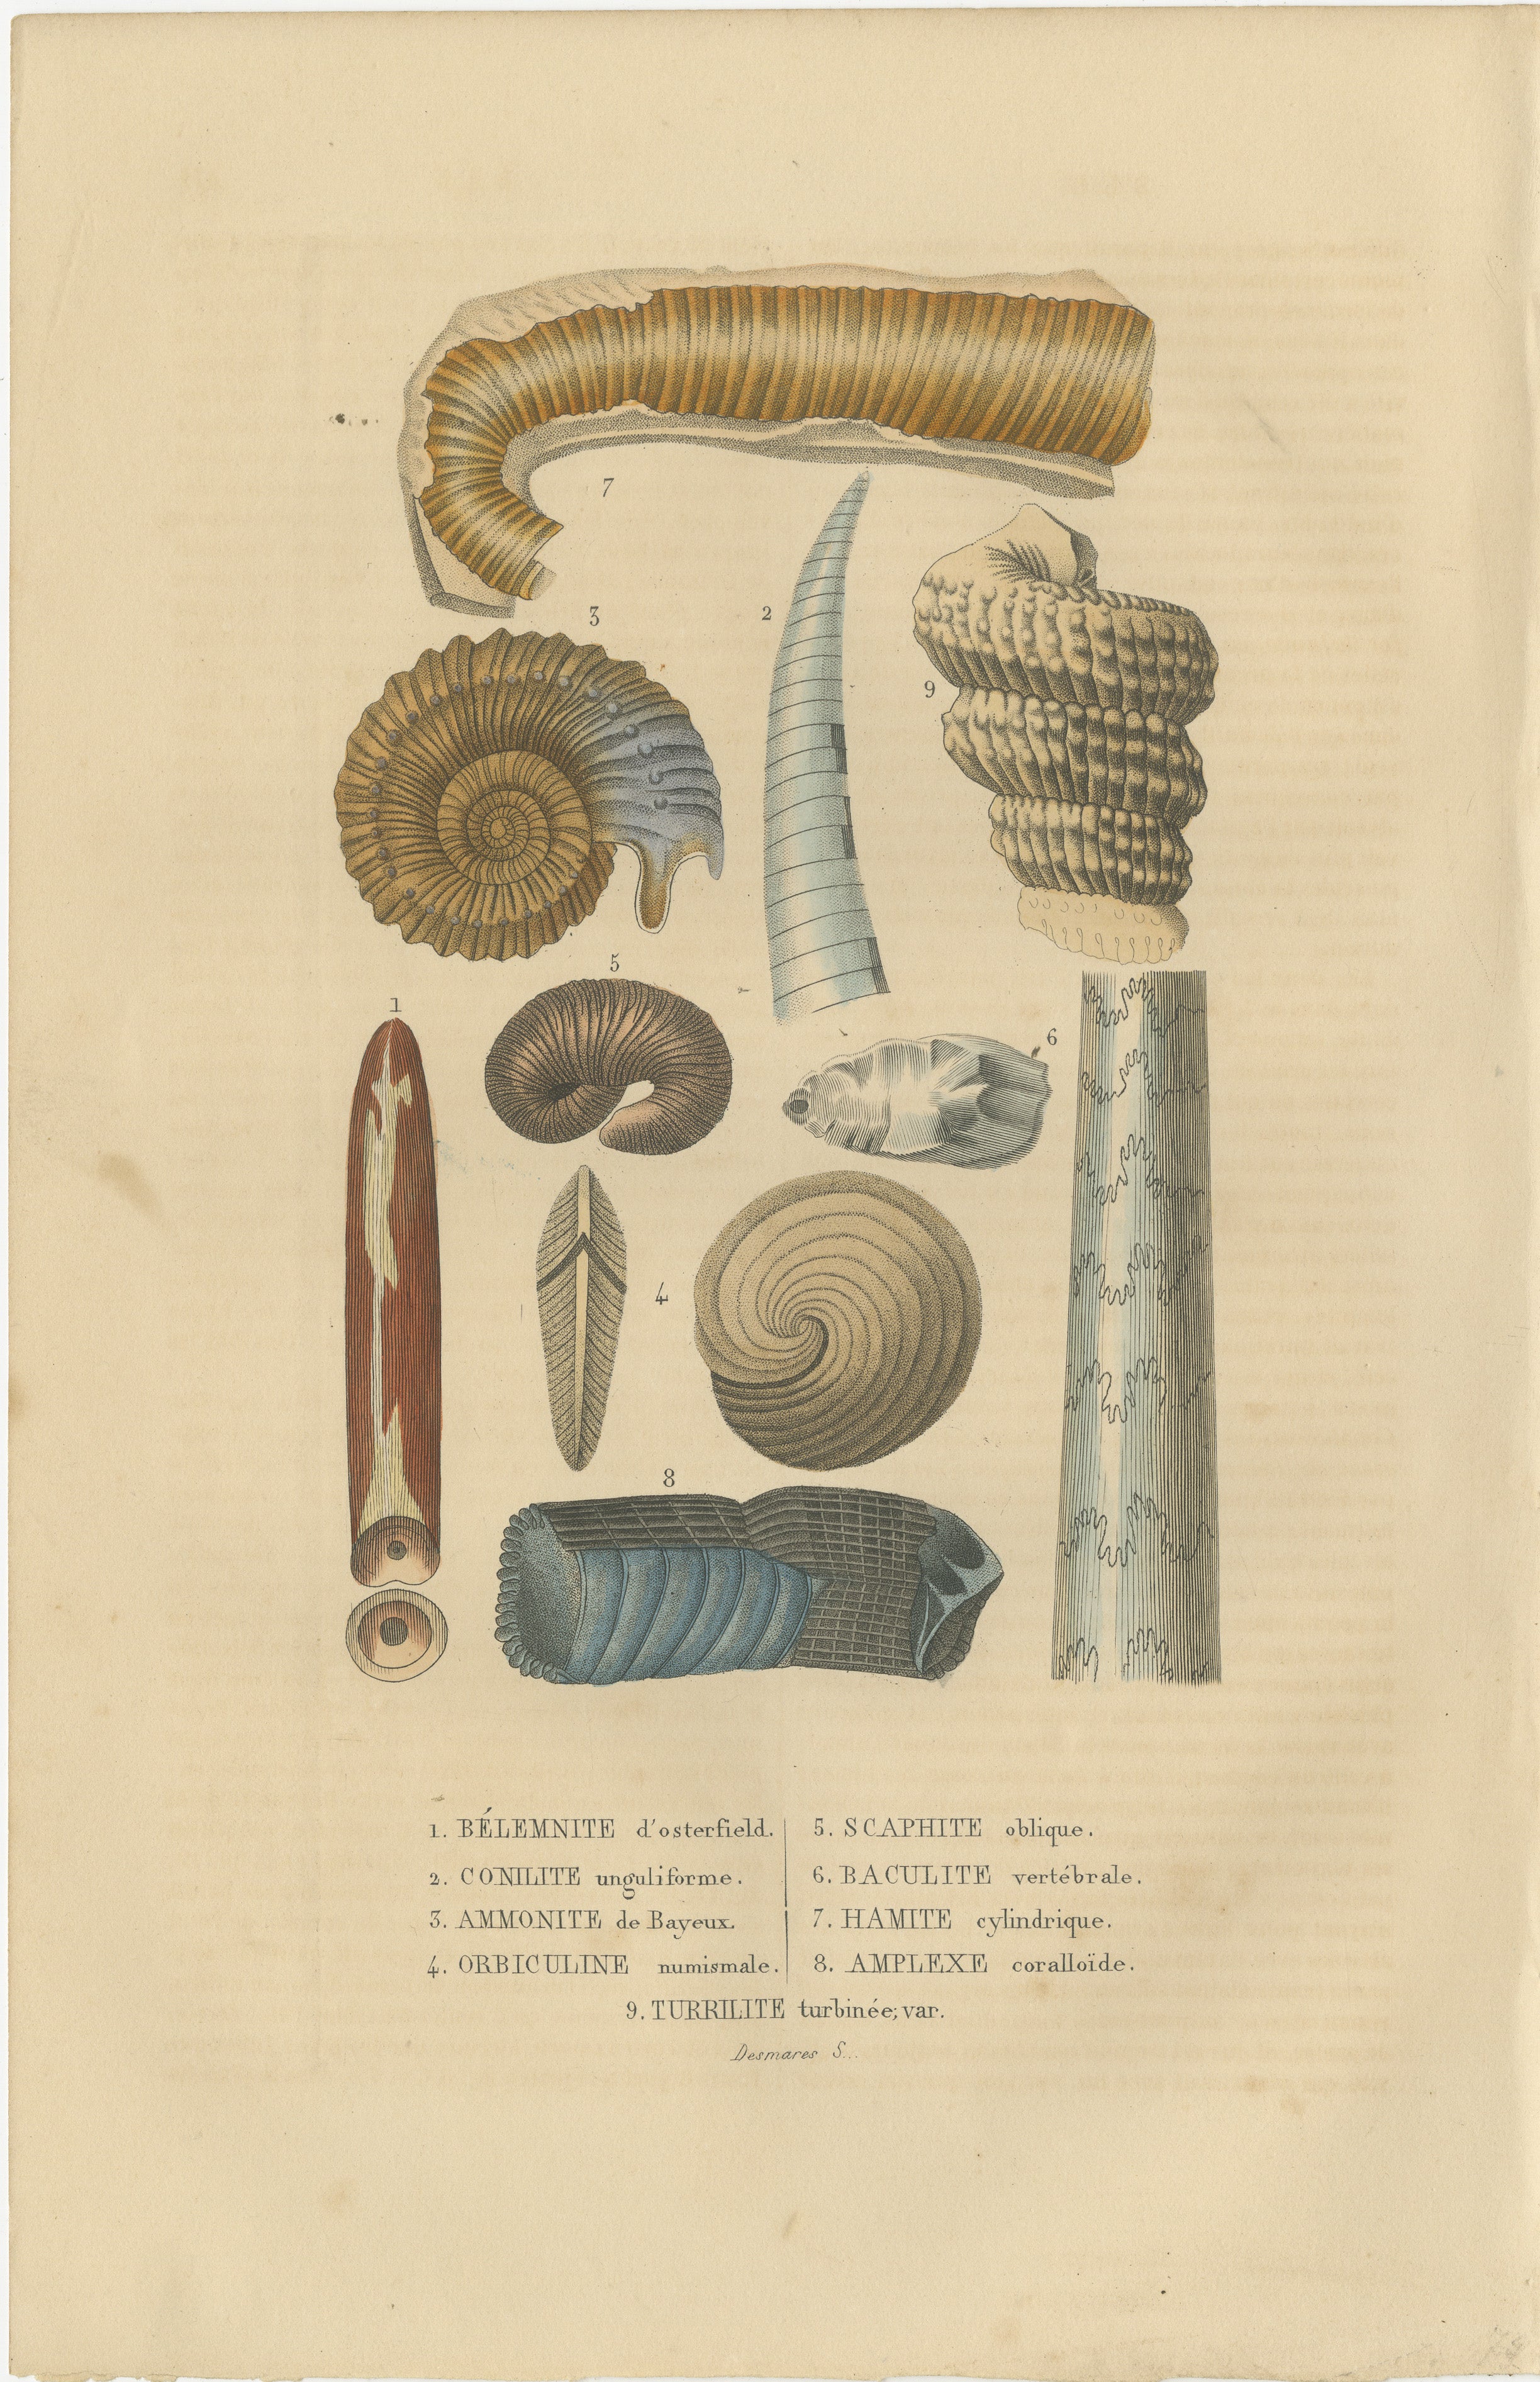 The print illustrates a variety of fossilized marine creatures, specifically cephalopods and gastropods, as well as coral:

1. **Élément d'ostreidé** - This could refer to a part of the skeleton of an oyster or a similar bivalve mollusk.
2.